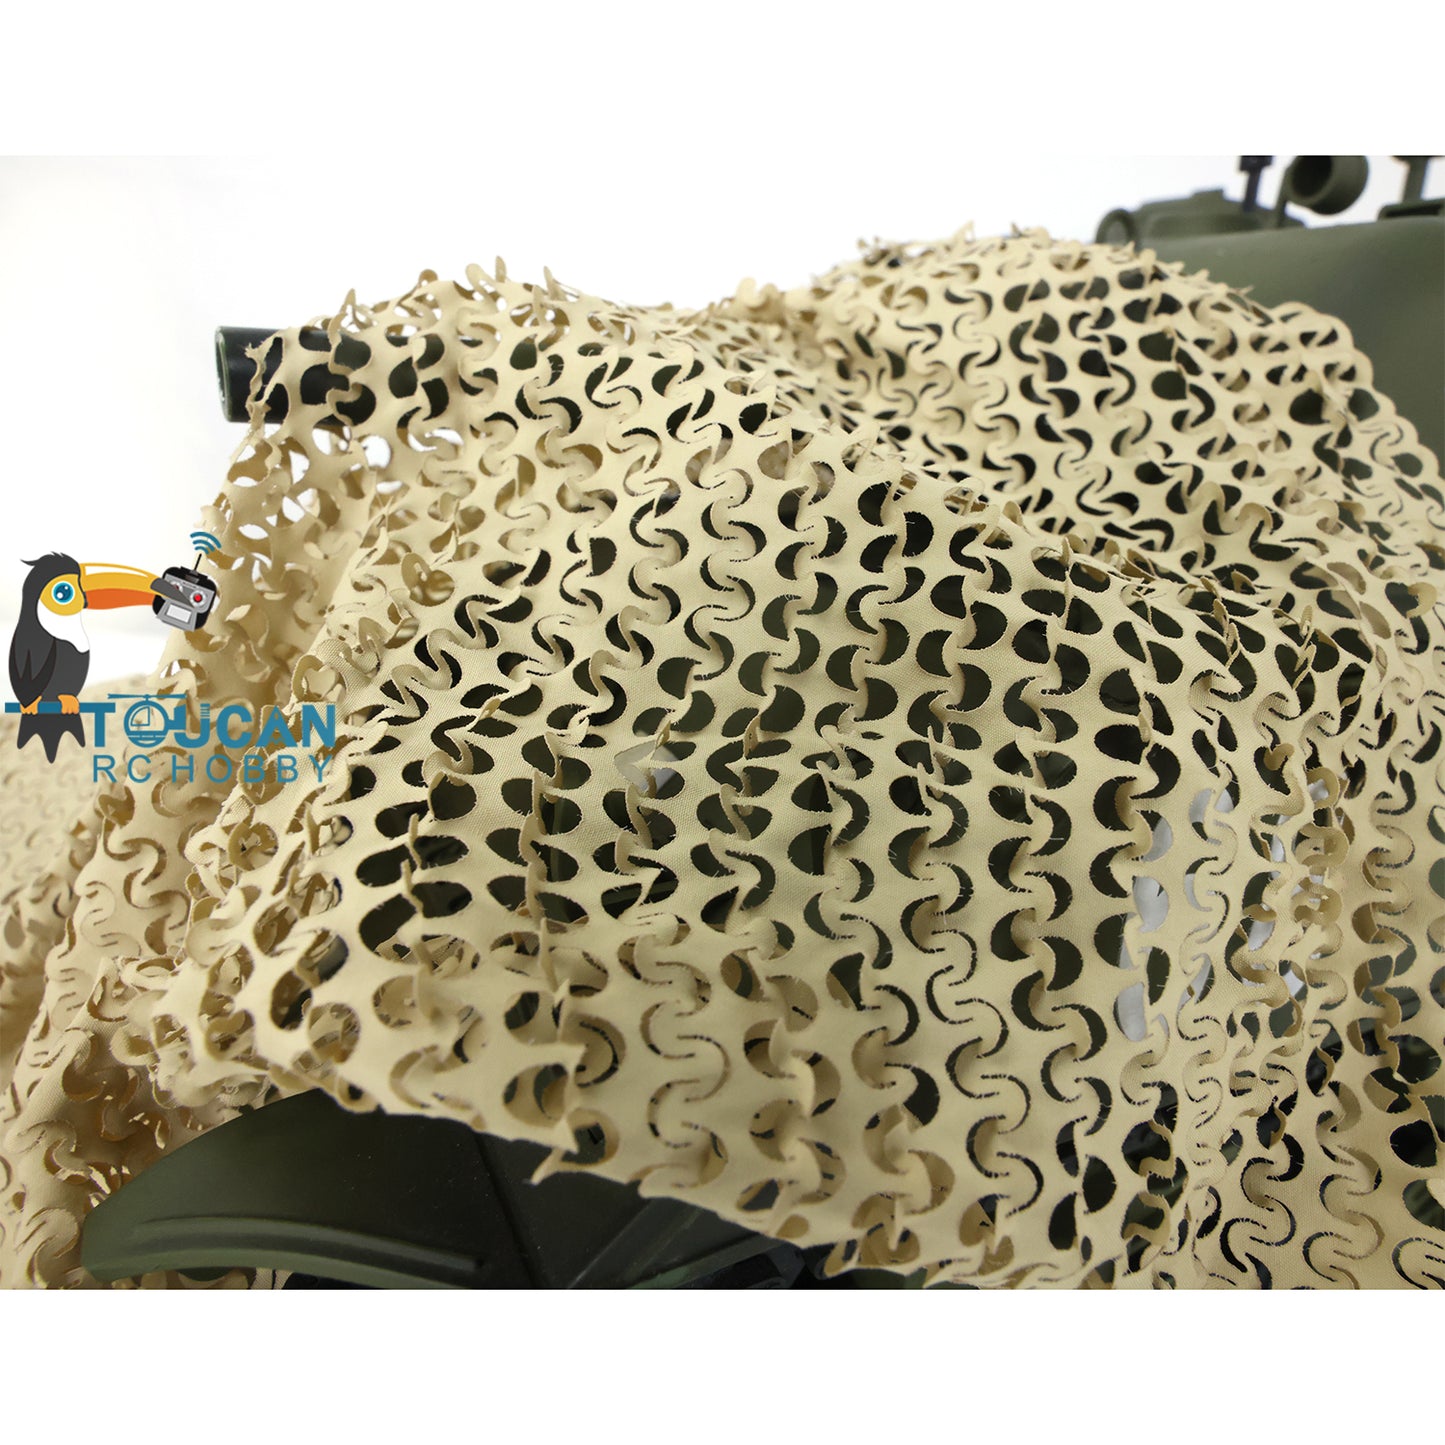 US STOCK Henglong Camouflage Net for 1:16 RC Military Tank M1A2 T34 Panther M26 Pershing Decorative Parts WWII